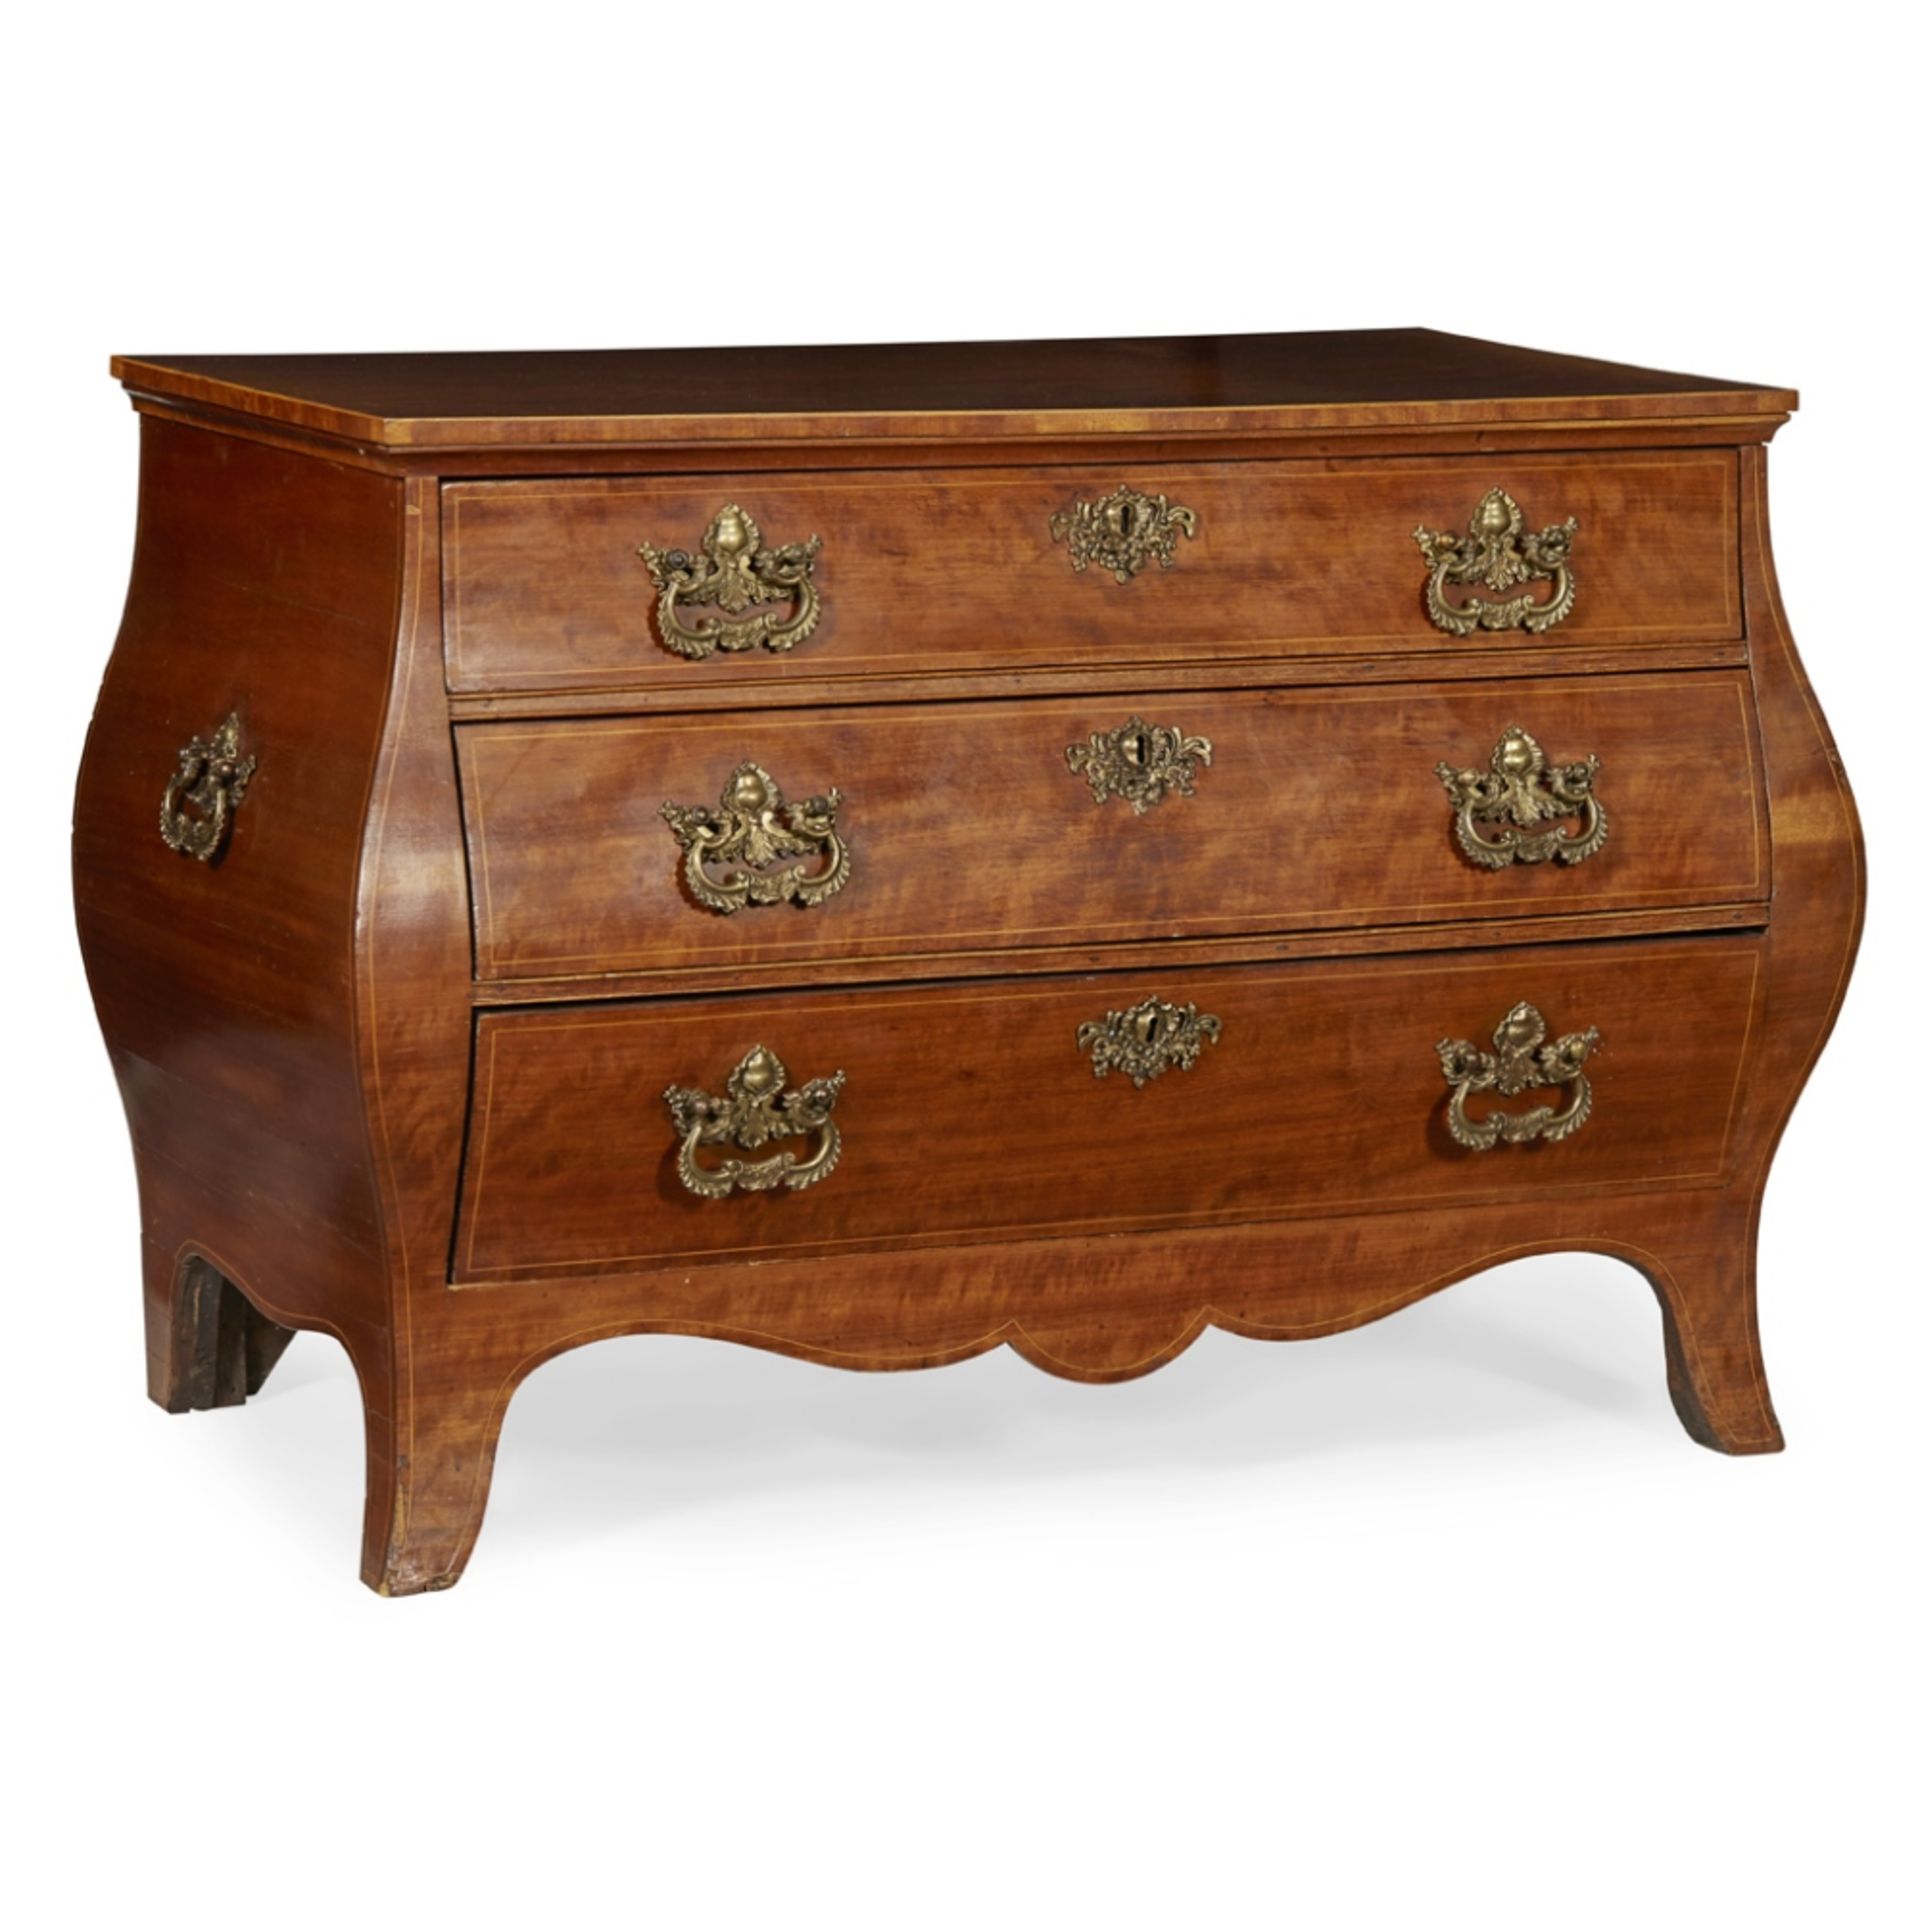 LATE GEORGE III SATINWOOD BOMBE COMMODE18TH CENTURY the rectangular top with boxwood stringing,